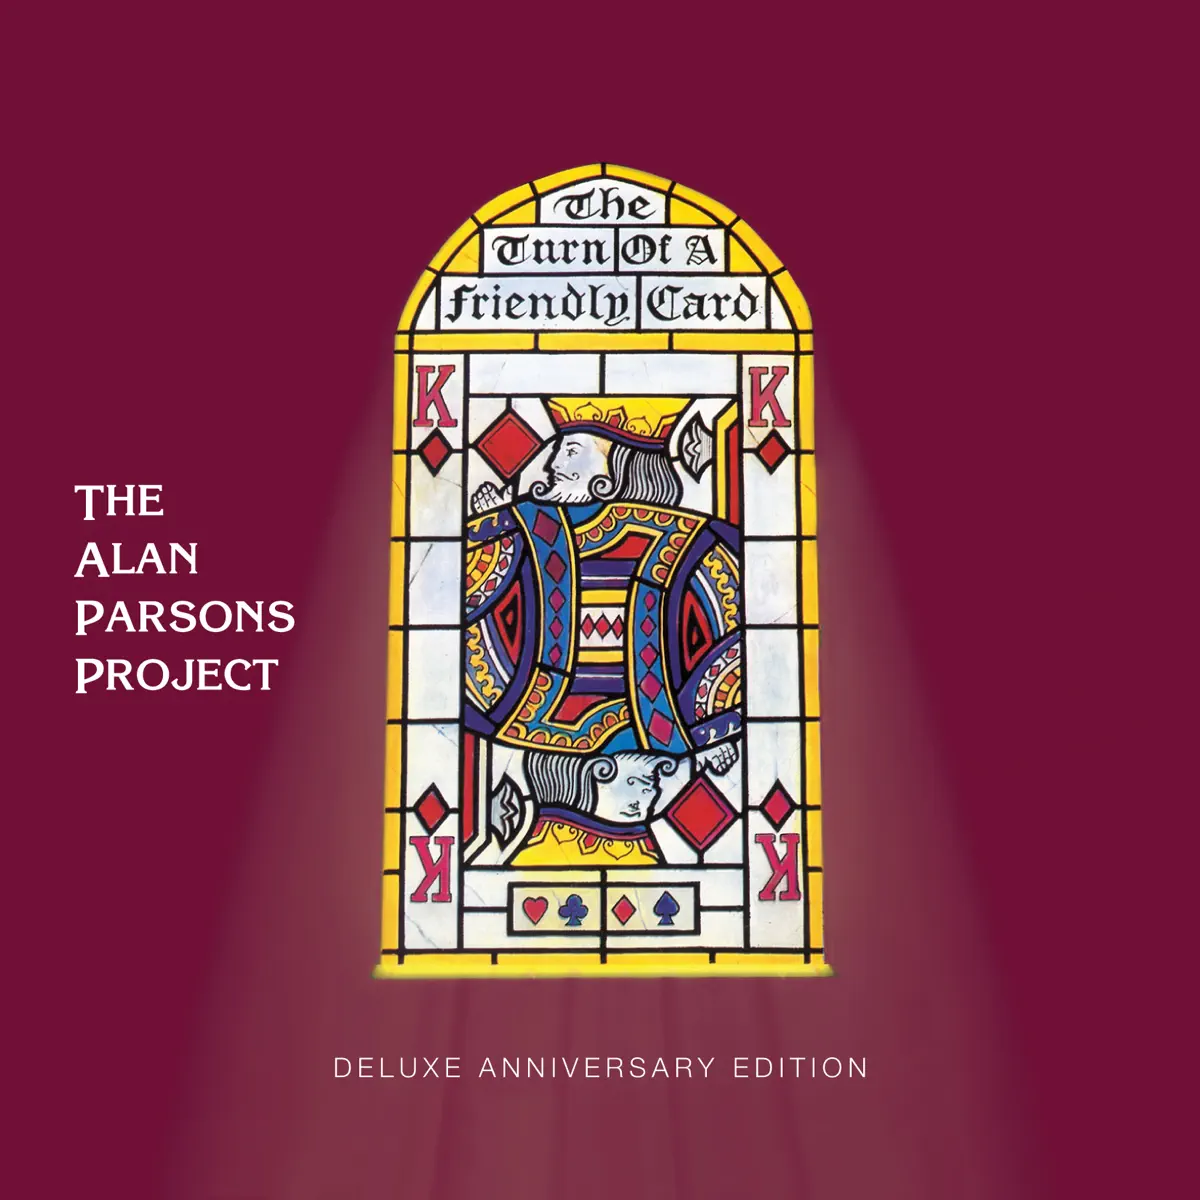 The Alan Parsons Project - The Turn of a Friendly Card (Deluxe Anniversary Edition) (2015) [iTunes Plus AAC M4A]-新房子